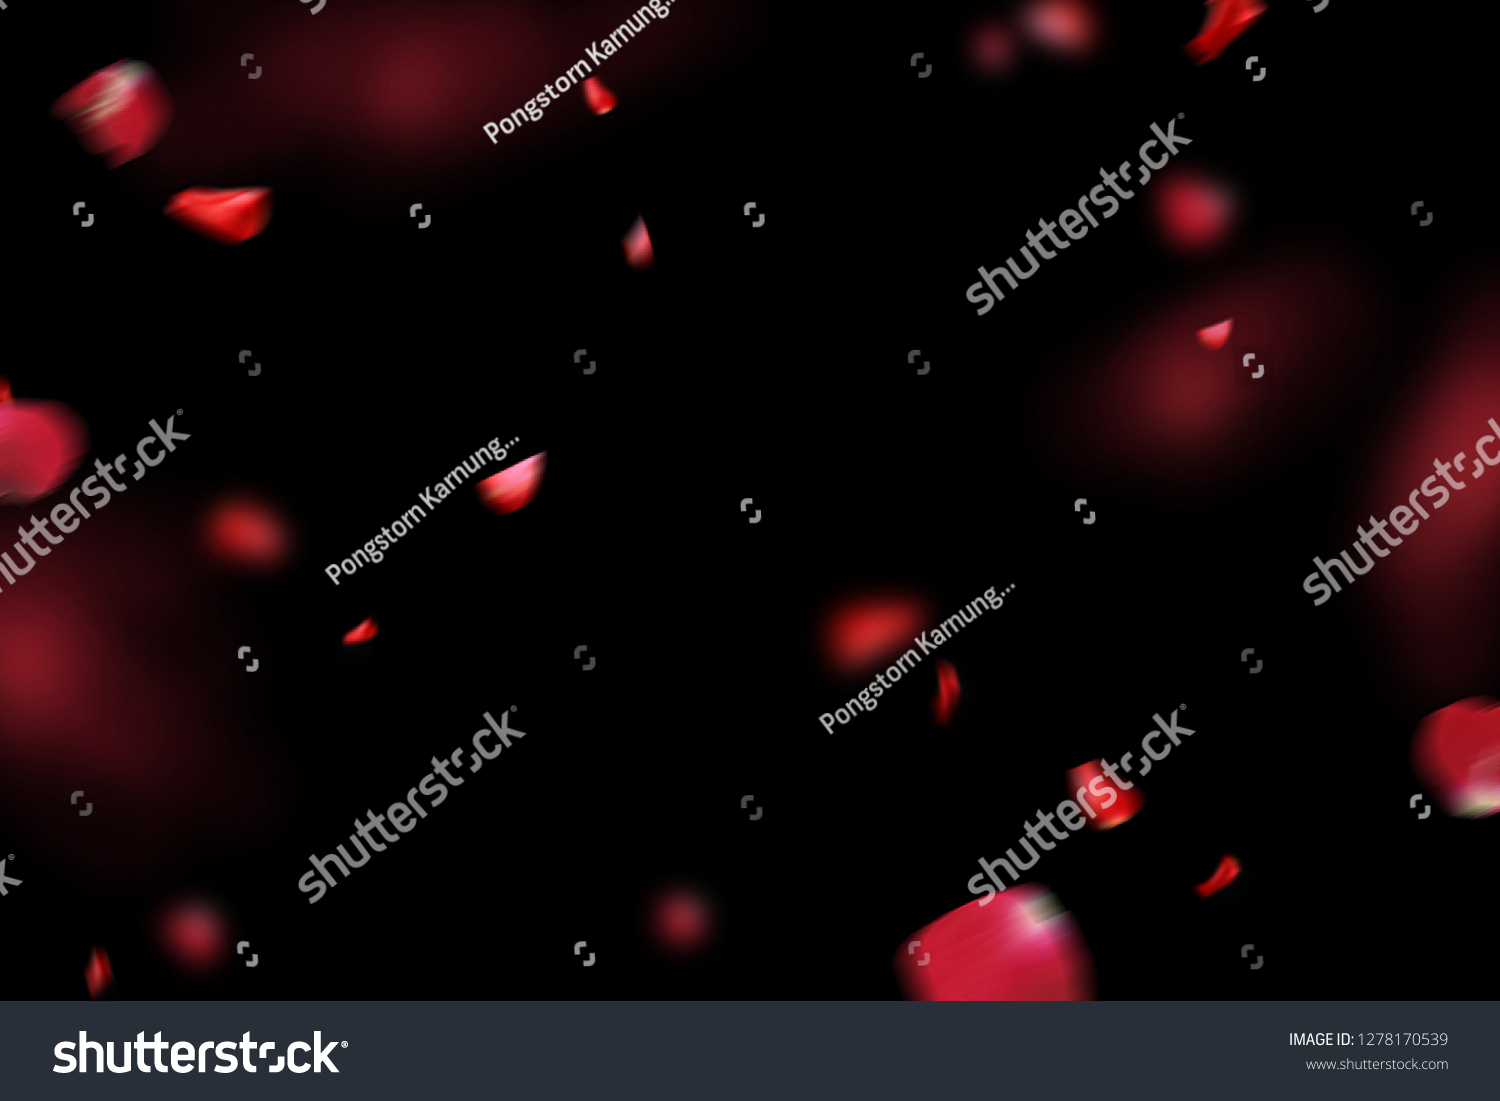 Background with red rose petals. Falling red flower petals and pink. Happy Valentines day card. Valentine's day background. Set of Naturalistic Rose Petals on black background #1278170539